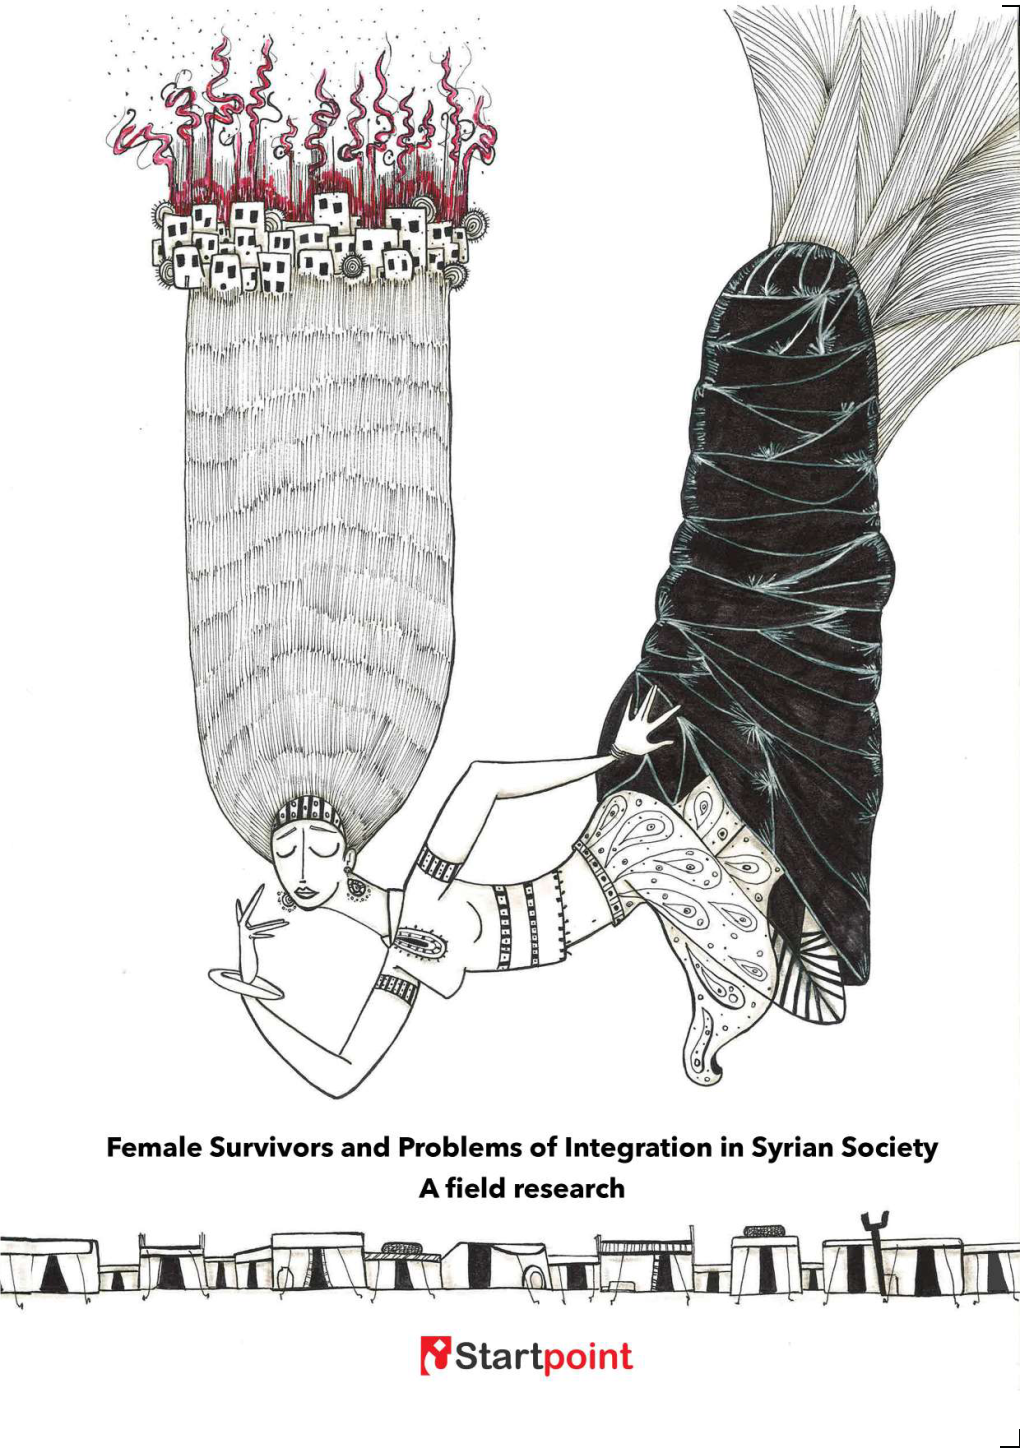 Female Detainees During the Syrian Revolution: